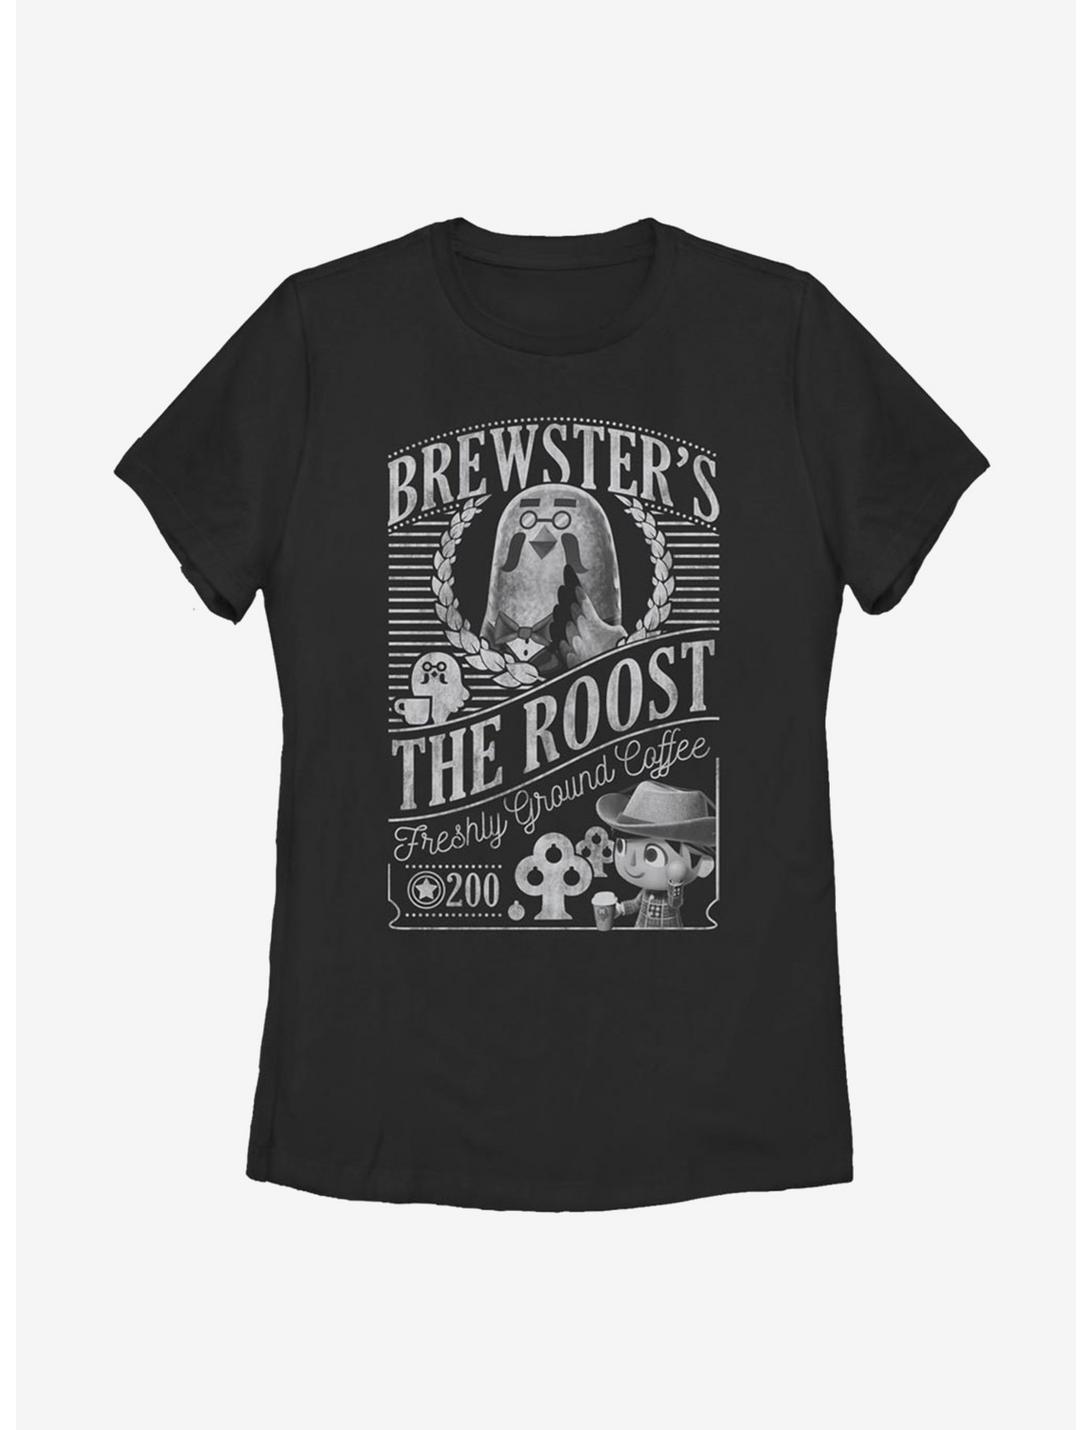 Plus Size Animal Crossing Brewster's Cafe The Roost Womens T-Shirt, BLACK, hi-res